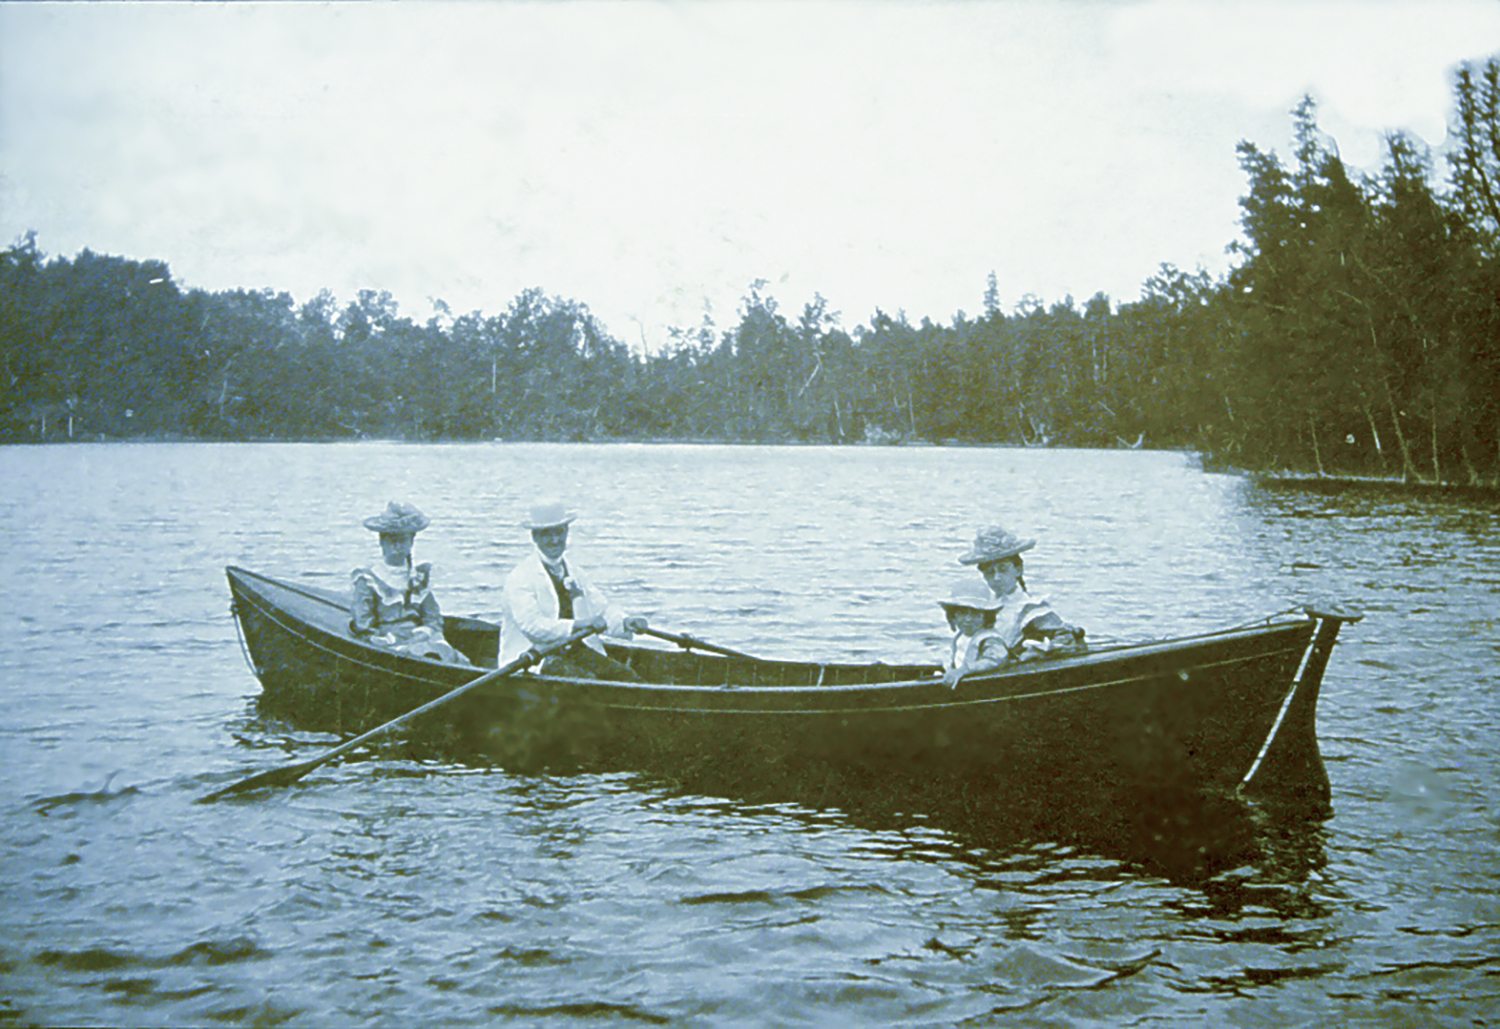 Three people in old-fashioned clothing sit in a canoe in the middle of a lake.